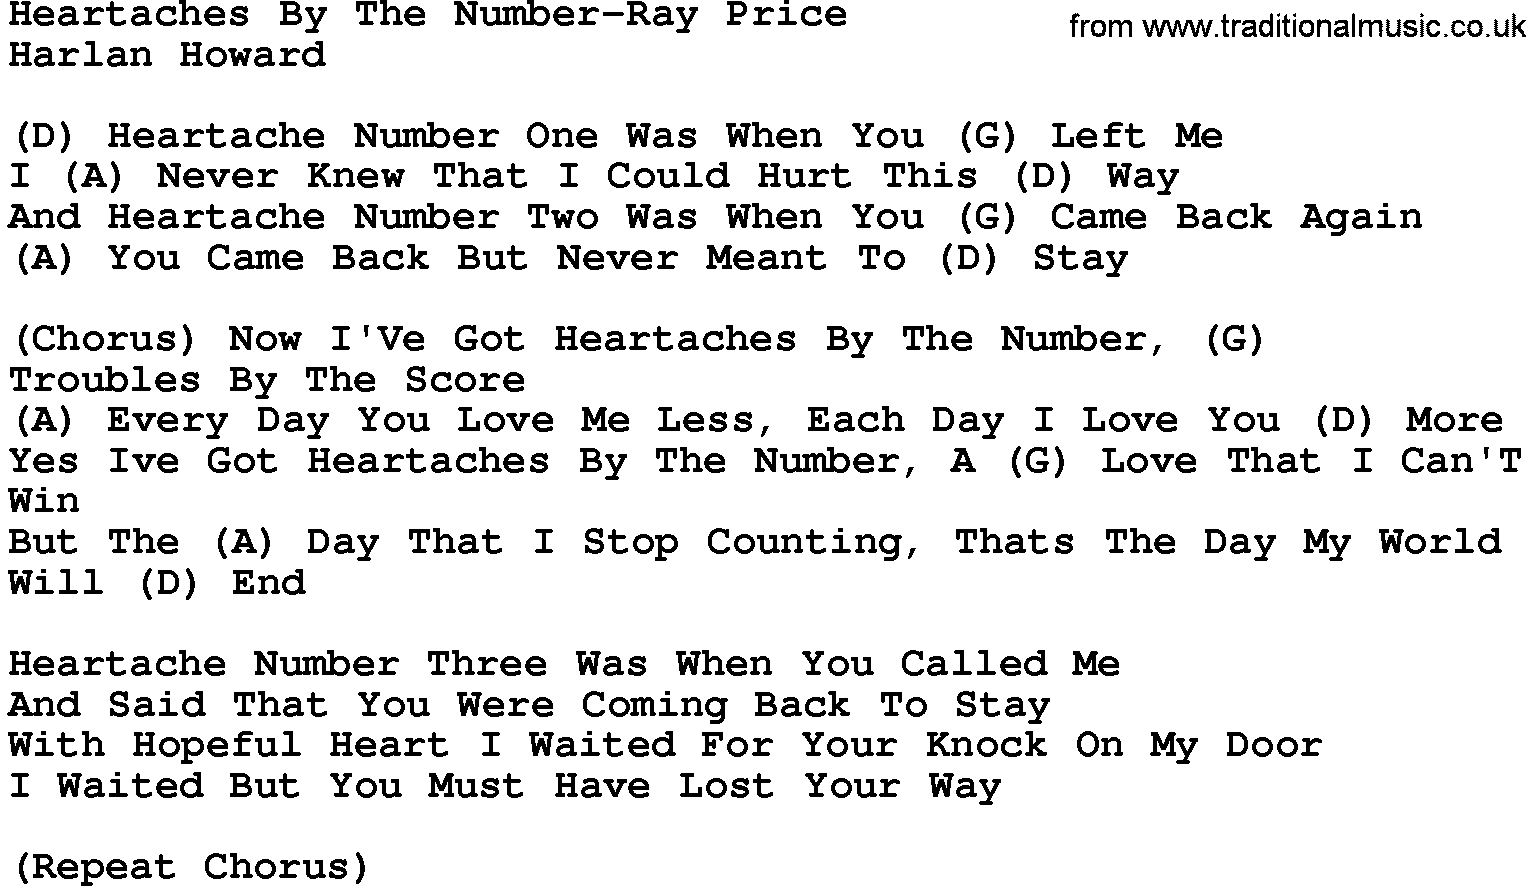 Country music song: Heartaches By The Number-Ray Price lyrics and chords